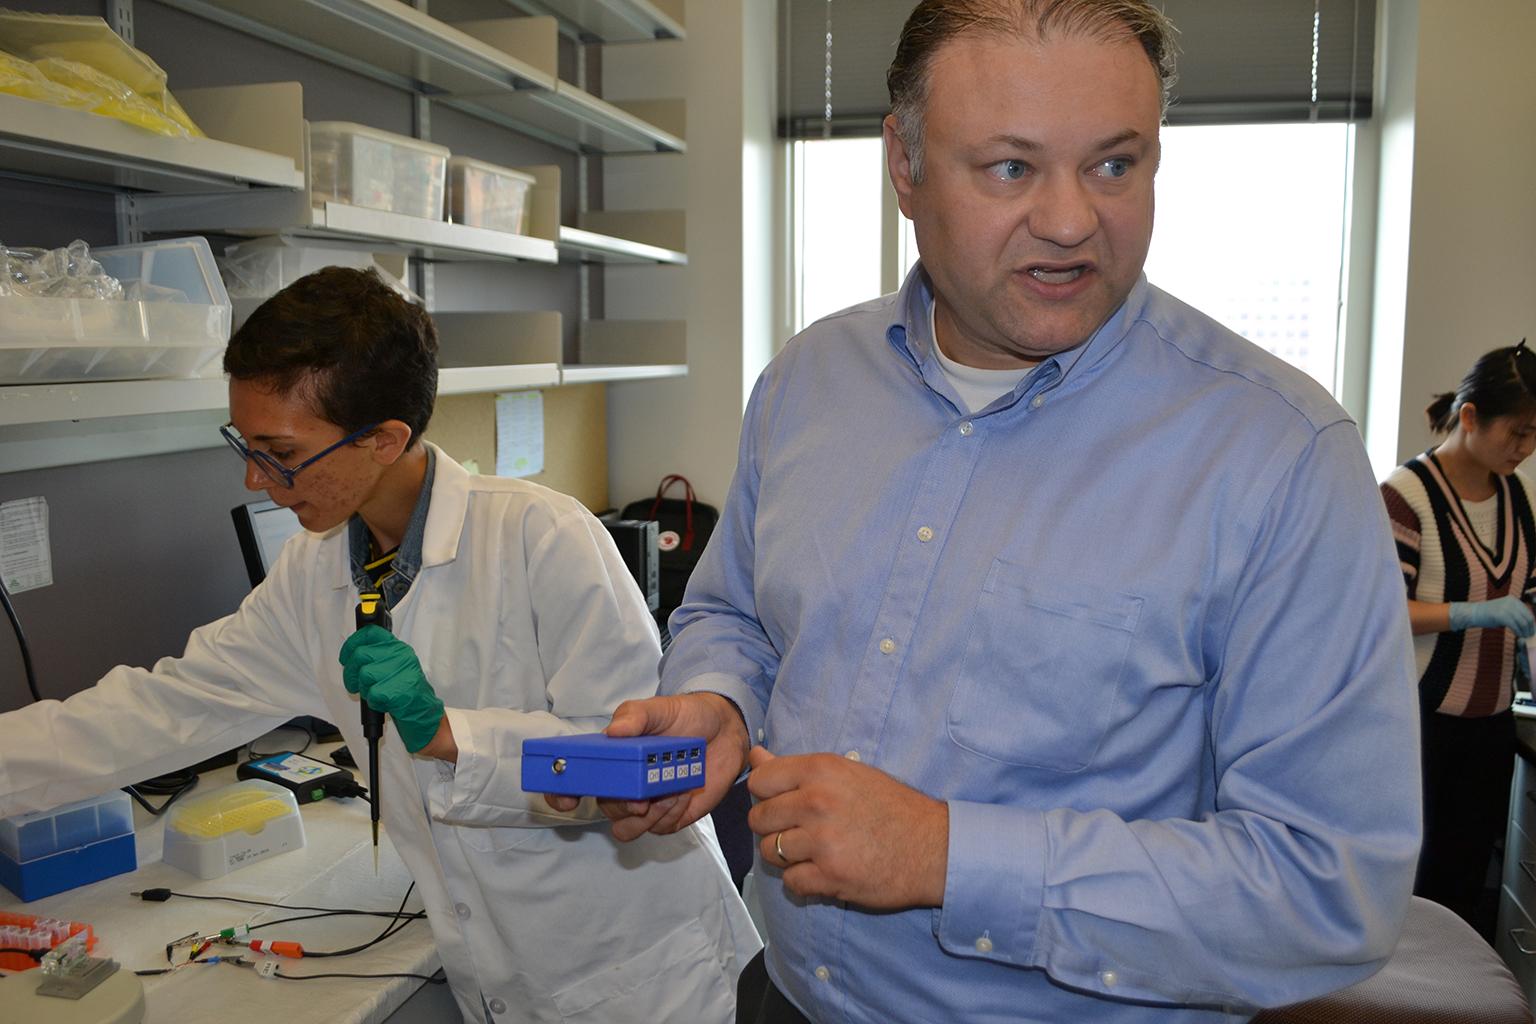 UIC bioengineering professor Ian Papautsky holds an electronic instrument used in conjunction with the sensor he is developing that will measure human exposure to toxic metals using a single finger prick of blood. (Alex Ruppenthal / Chicago Tonight)